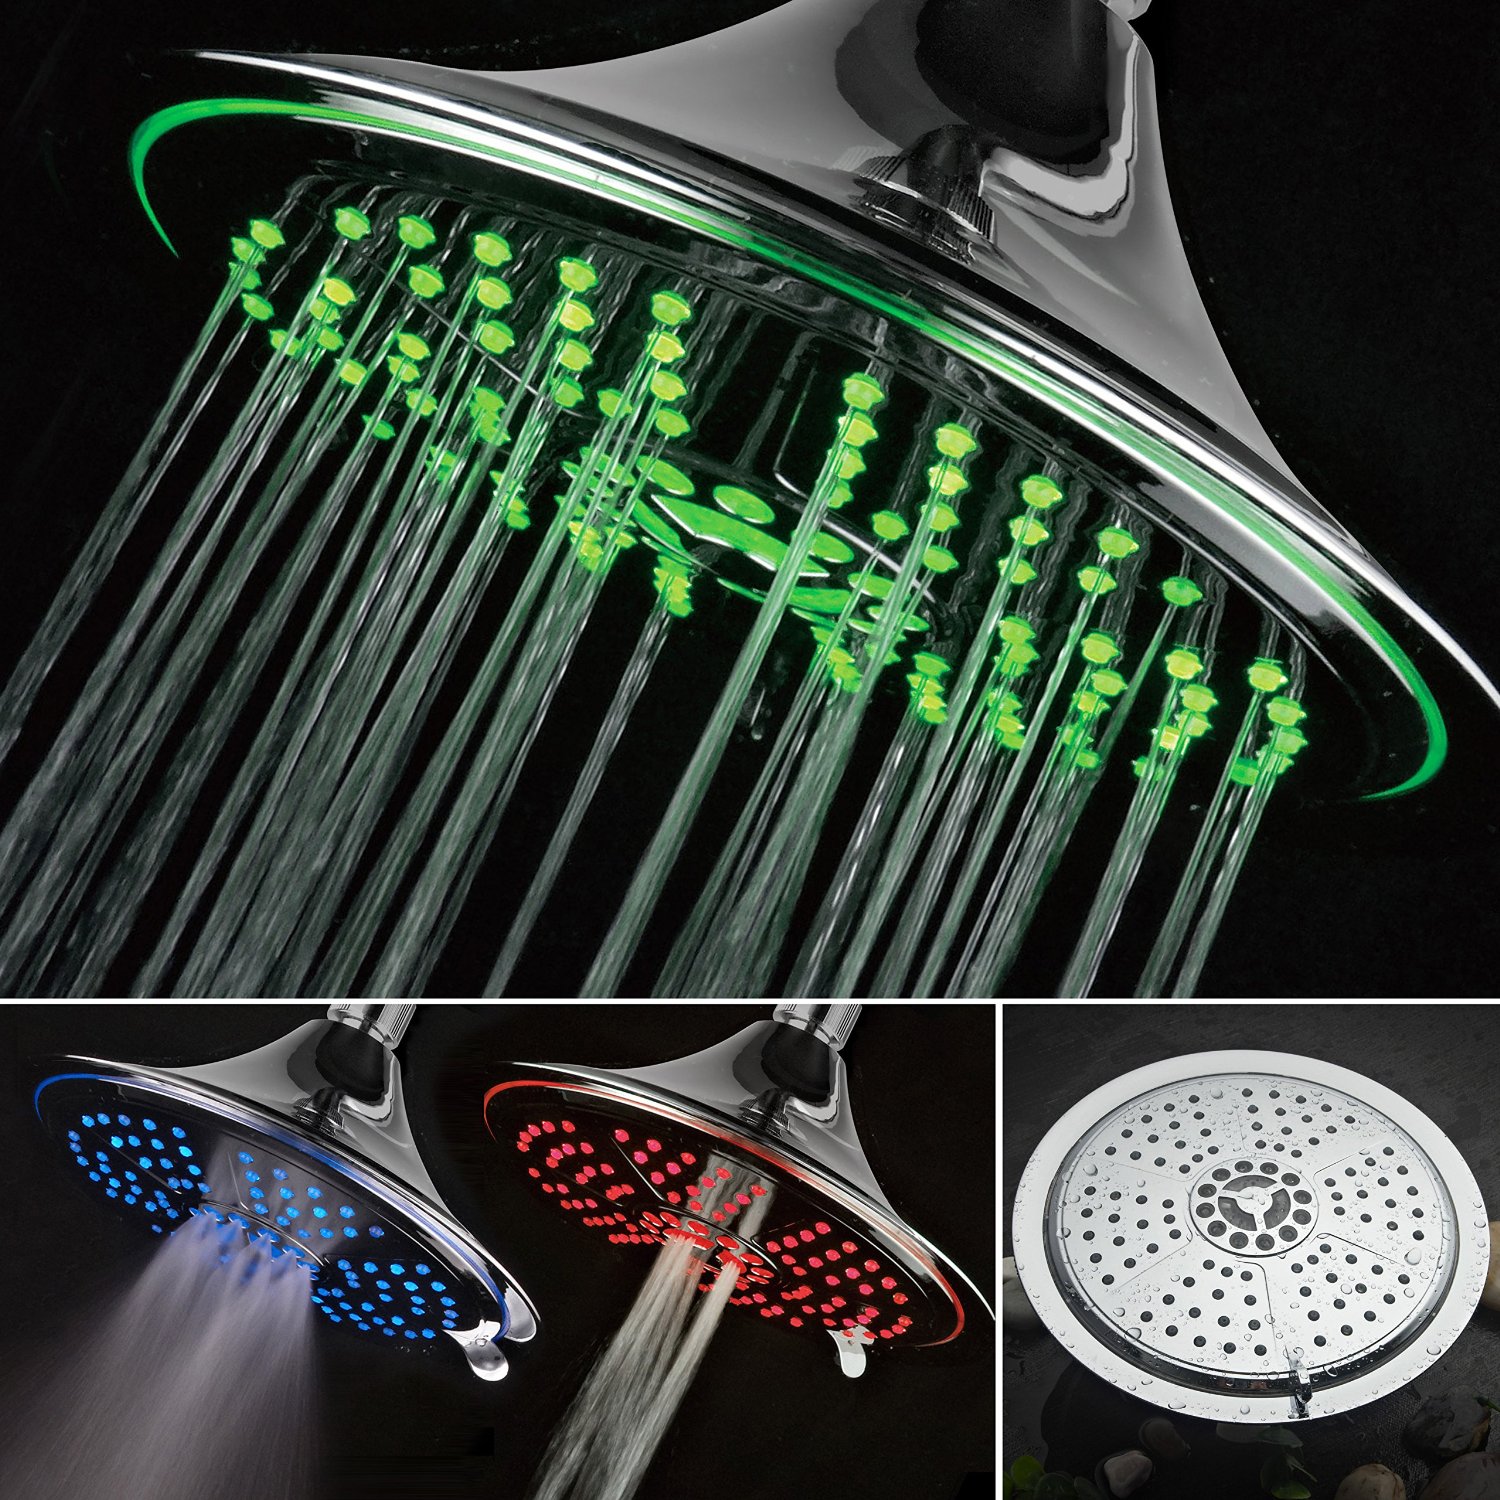 Dreamspa Ultra Luxury Extra-large 8 in Rainfall LED Shower Head with 5 Settings